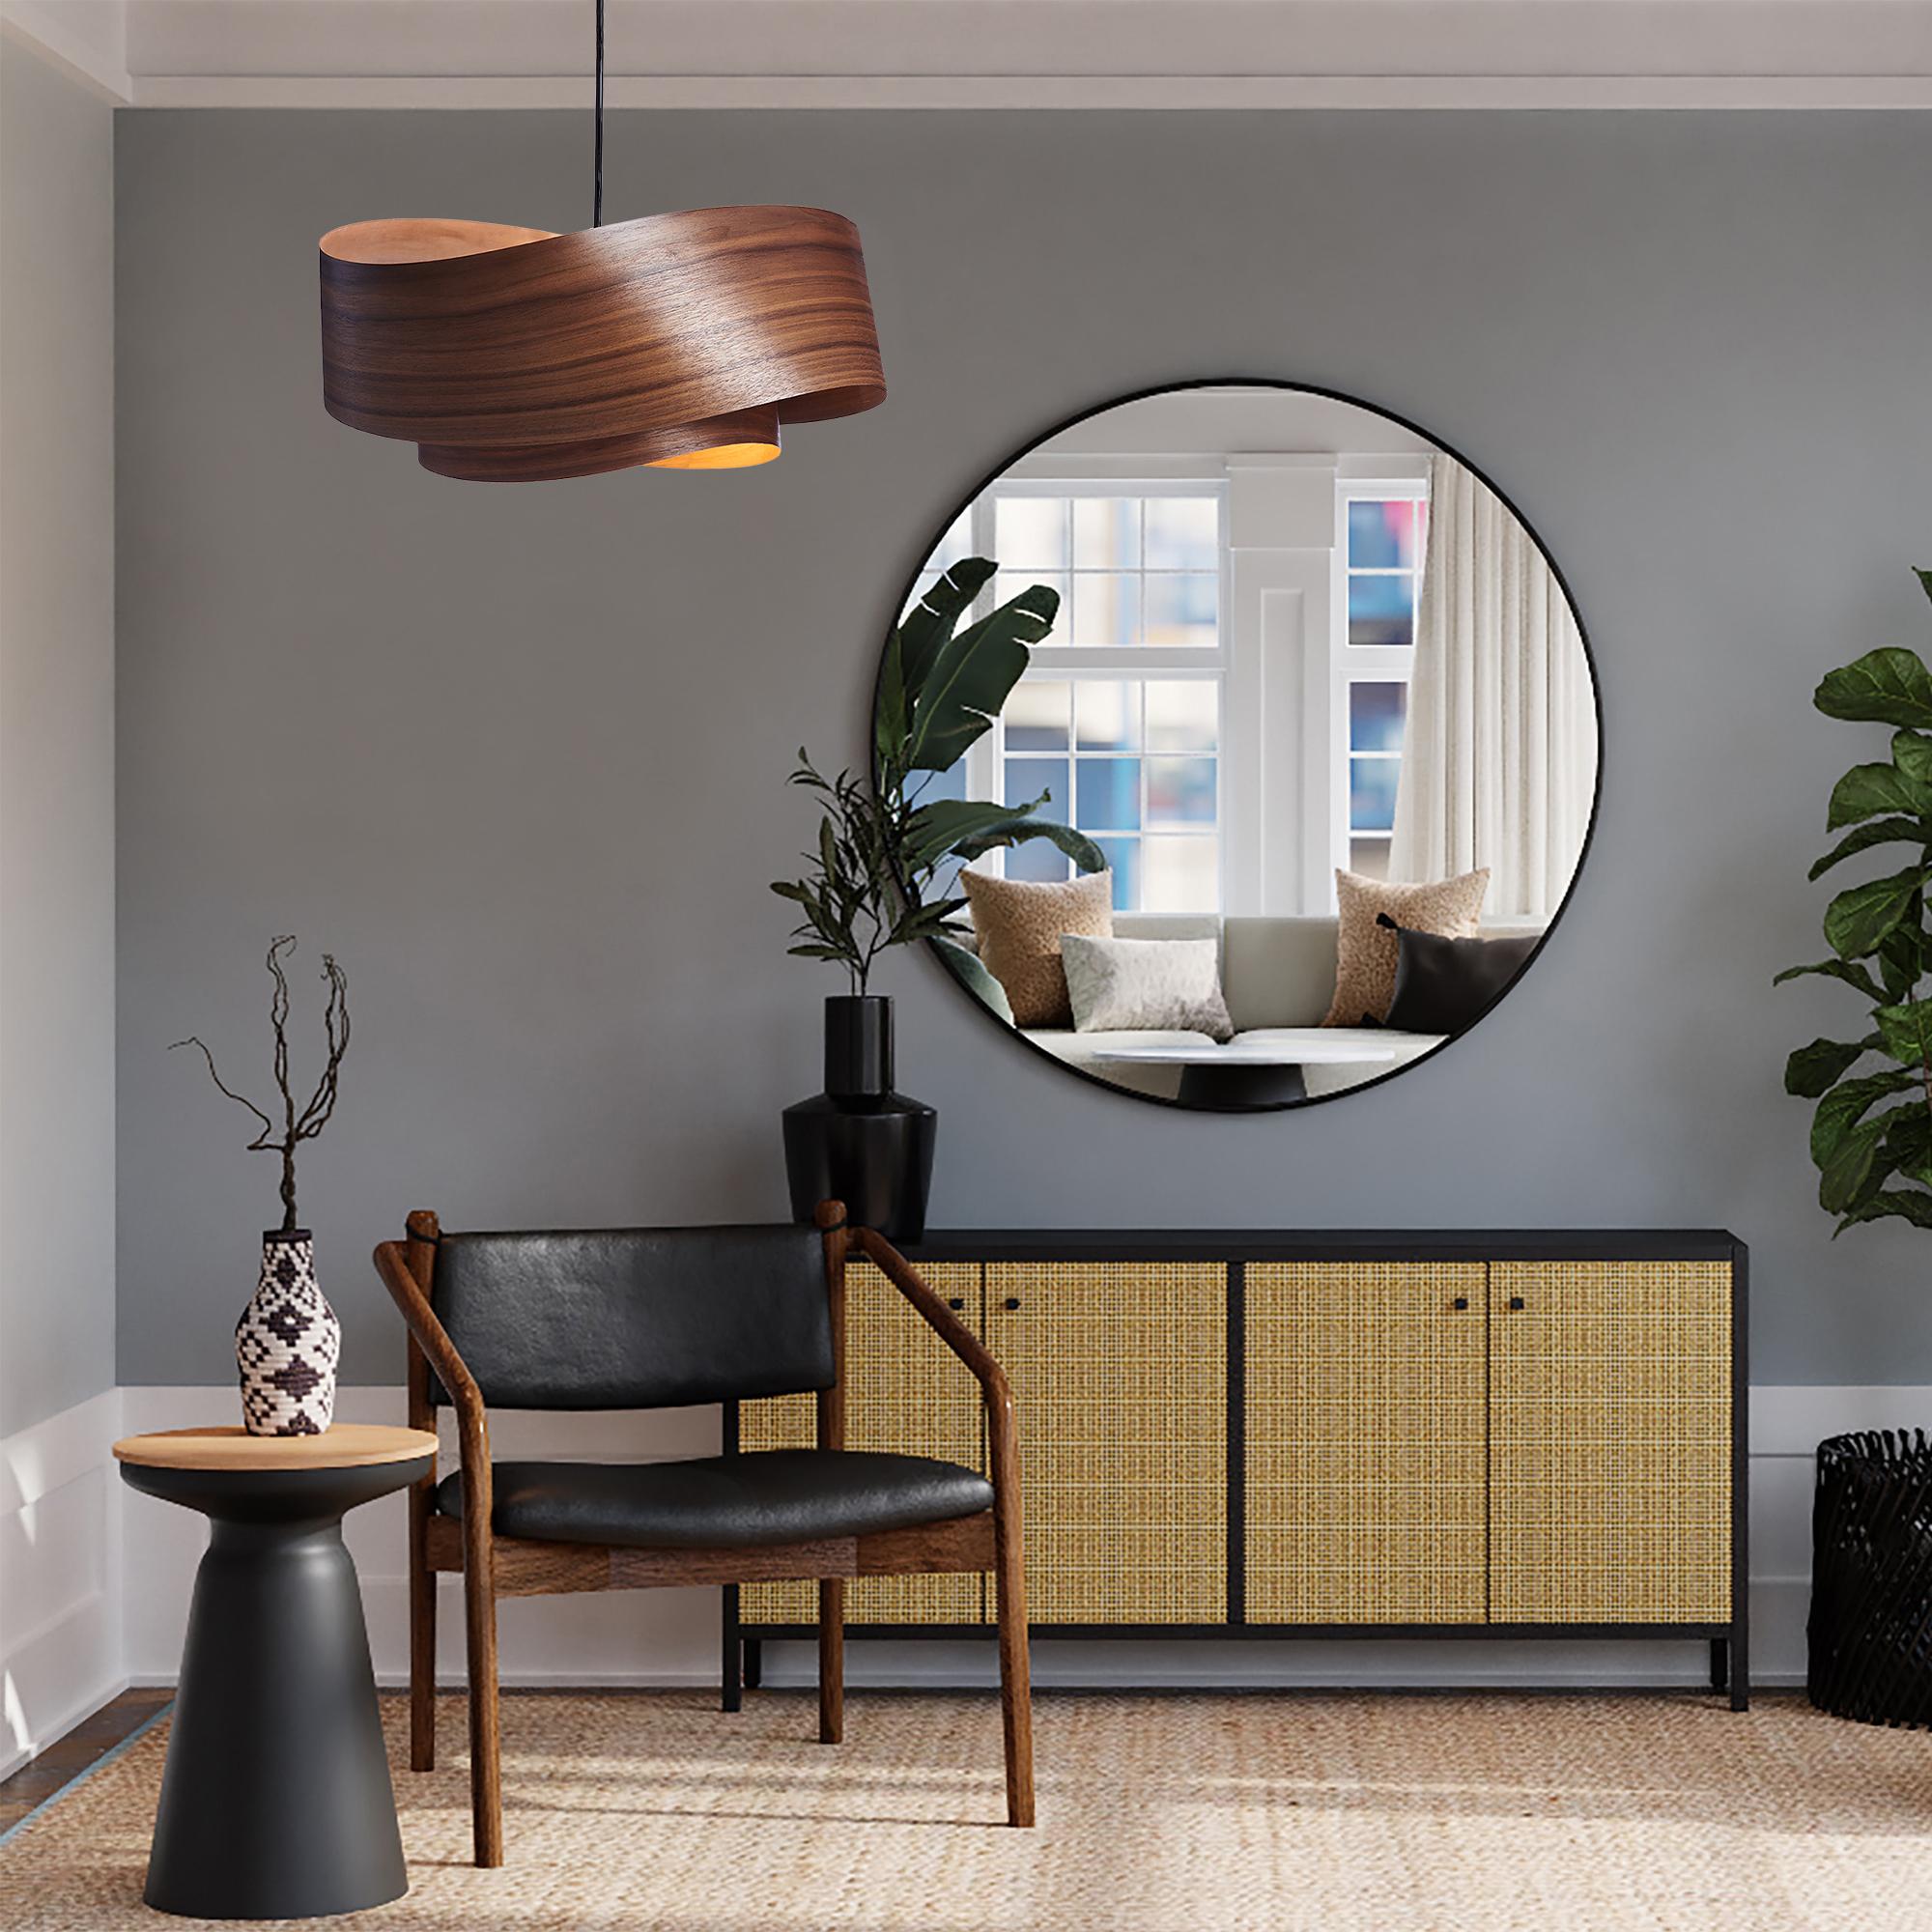 Add a touch of organic elegance to your home with this stunning mid-century modern walnut pendant light. Inspired by Danish modern design, its minimalist silhouette and warm wood tones create a warm and inviting atmosphere.

Each light is